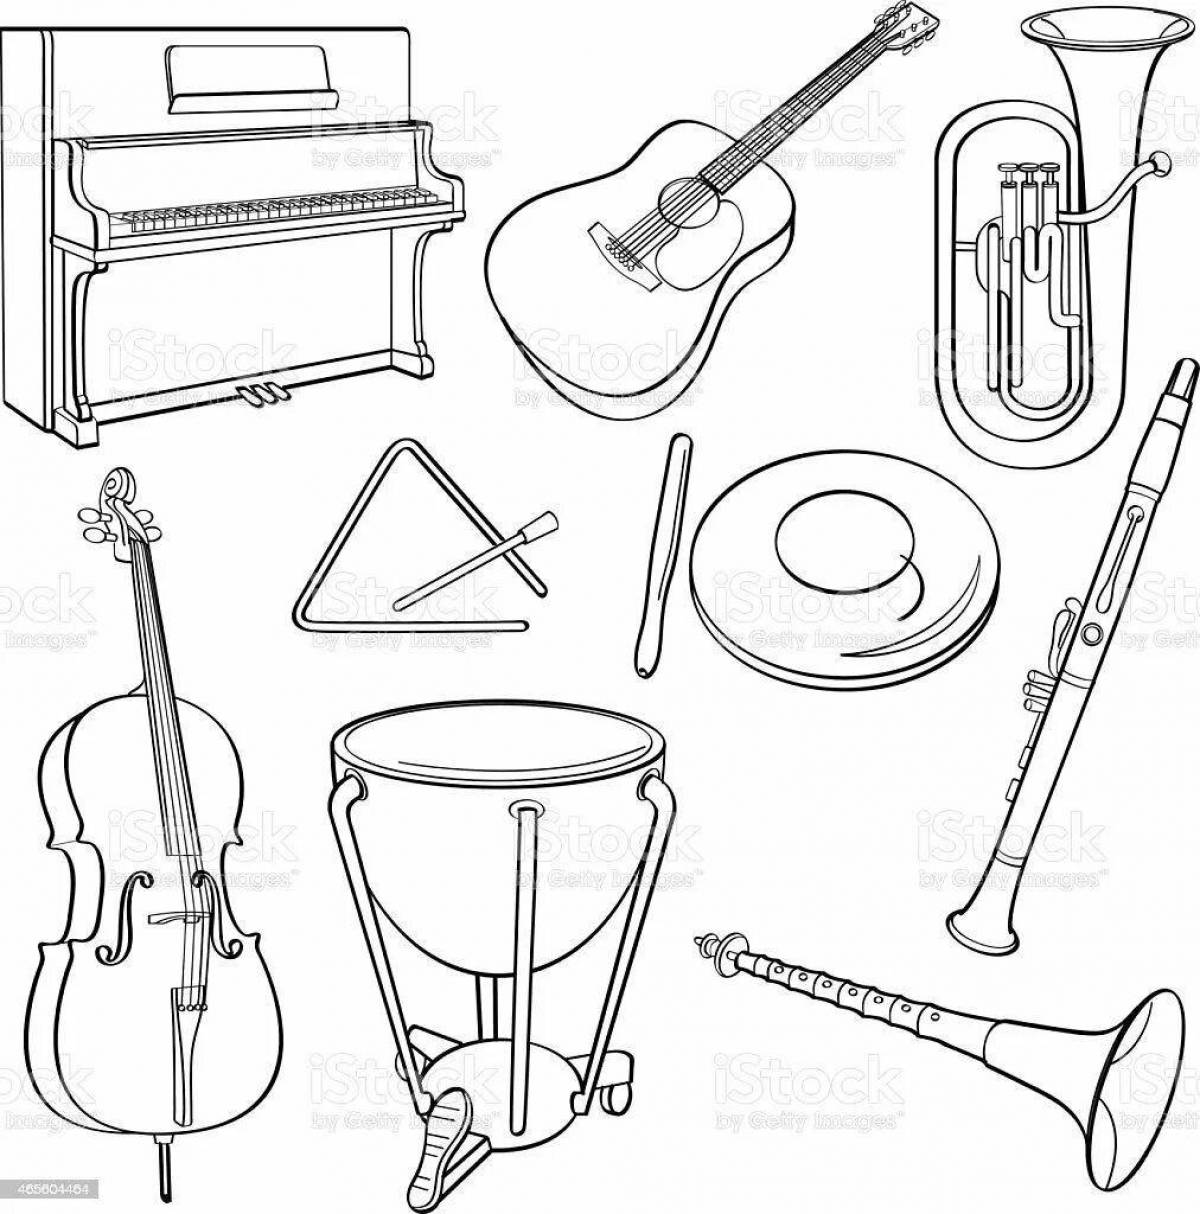 Colorful symphony orchestra coloring book